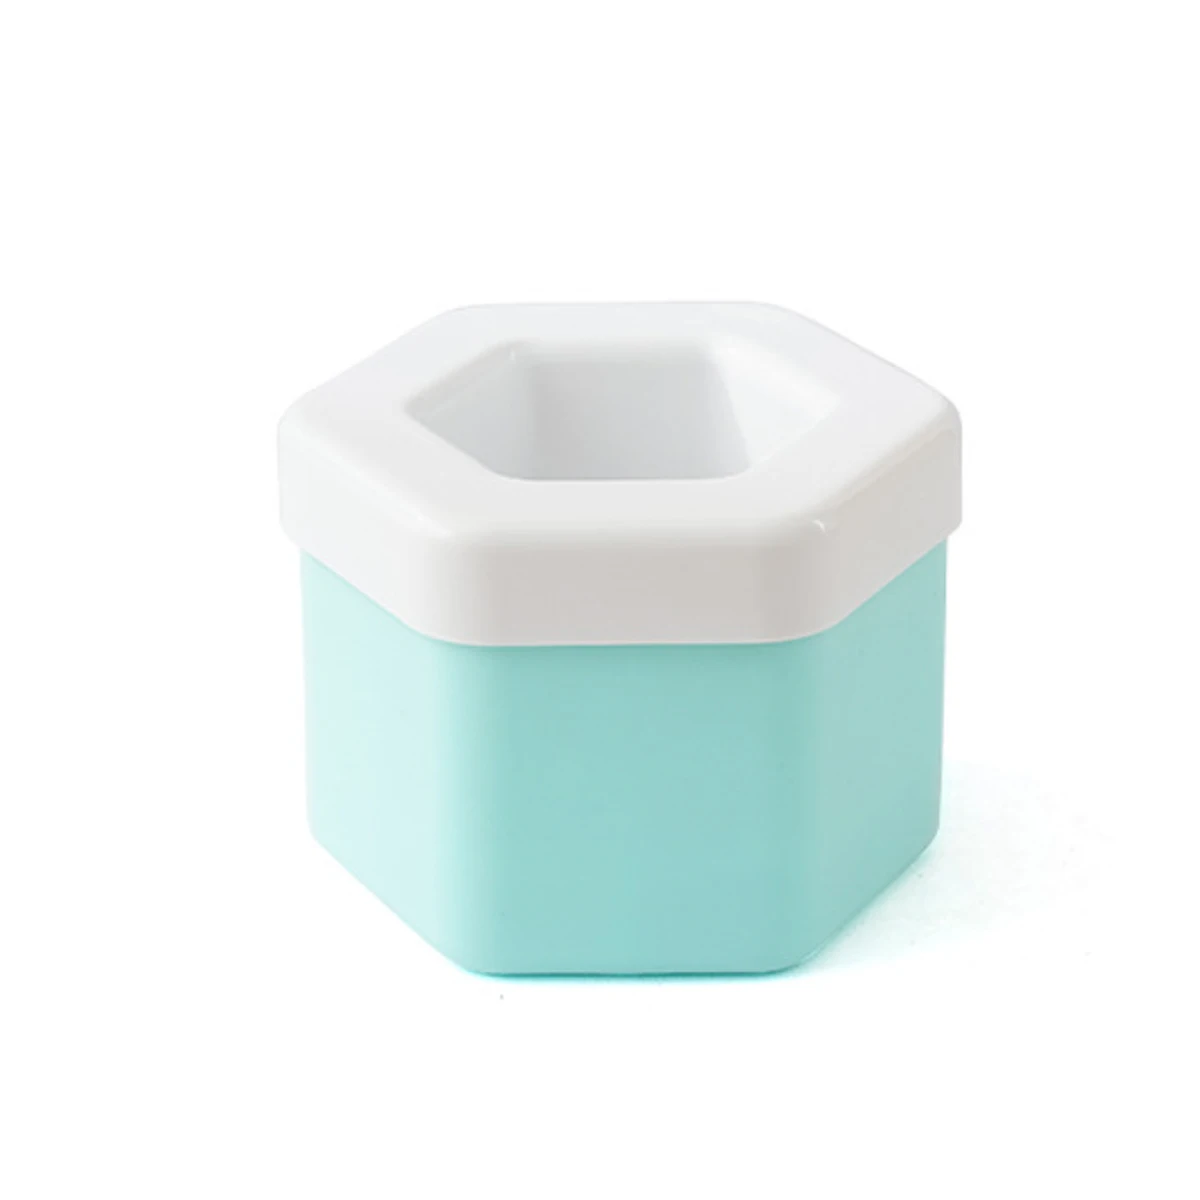 The Ultimate Ice Cube Maker Silicone Bucket with Lid Makes Small Size  Nugget Ice Chips for Soft Drinks, Cocktail Ice, Wine On Ice, Crushed Ice  Maker